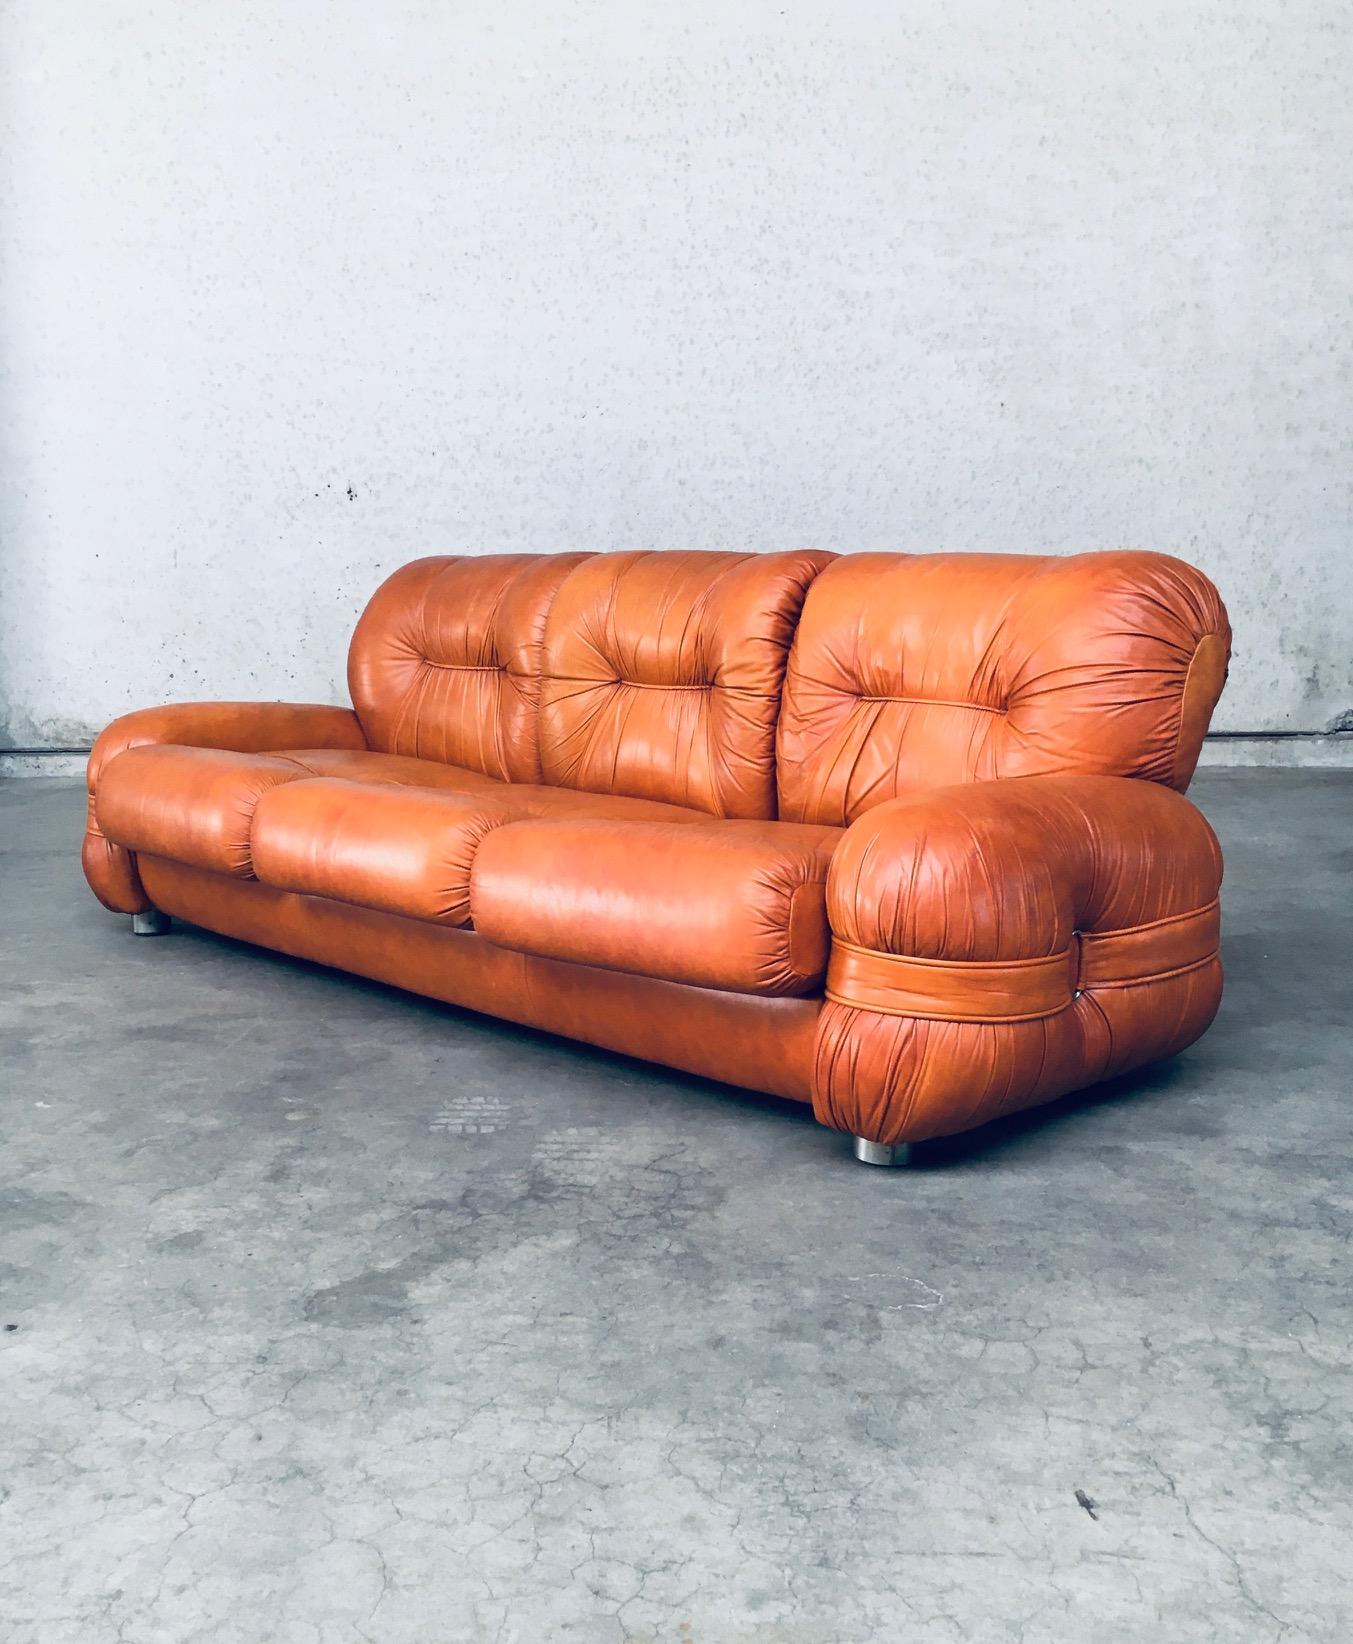 Vintage Midcentury Modern Italian Design Leather 3 Seat Sofa. Made in Italy, 1960's / 70's period. Cognac leather three seat sofa with straps and buckles on the side rests. Bulbous shapes on this very comfy and beautiful sofa. This comes in very